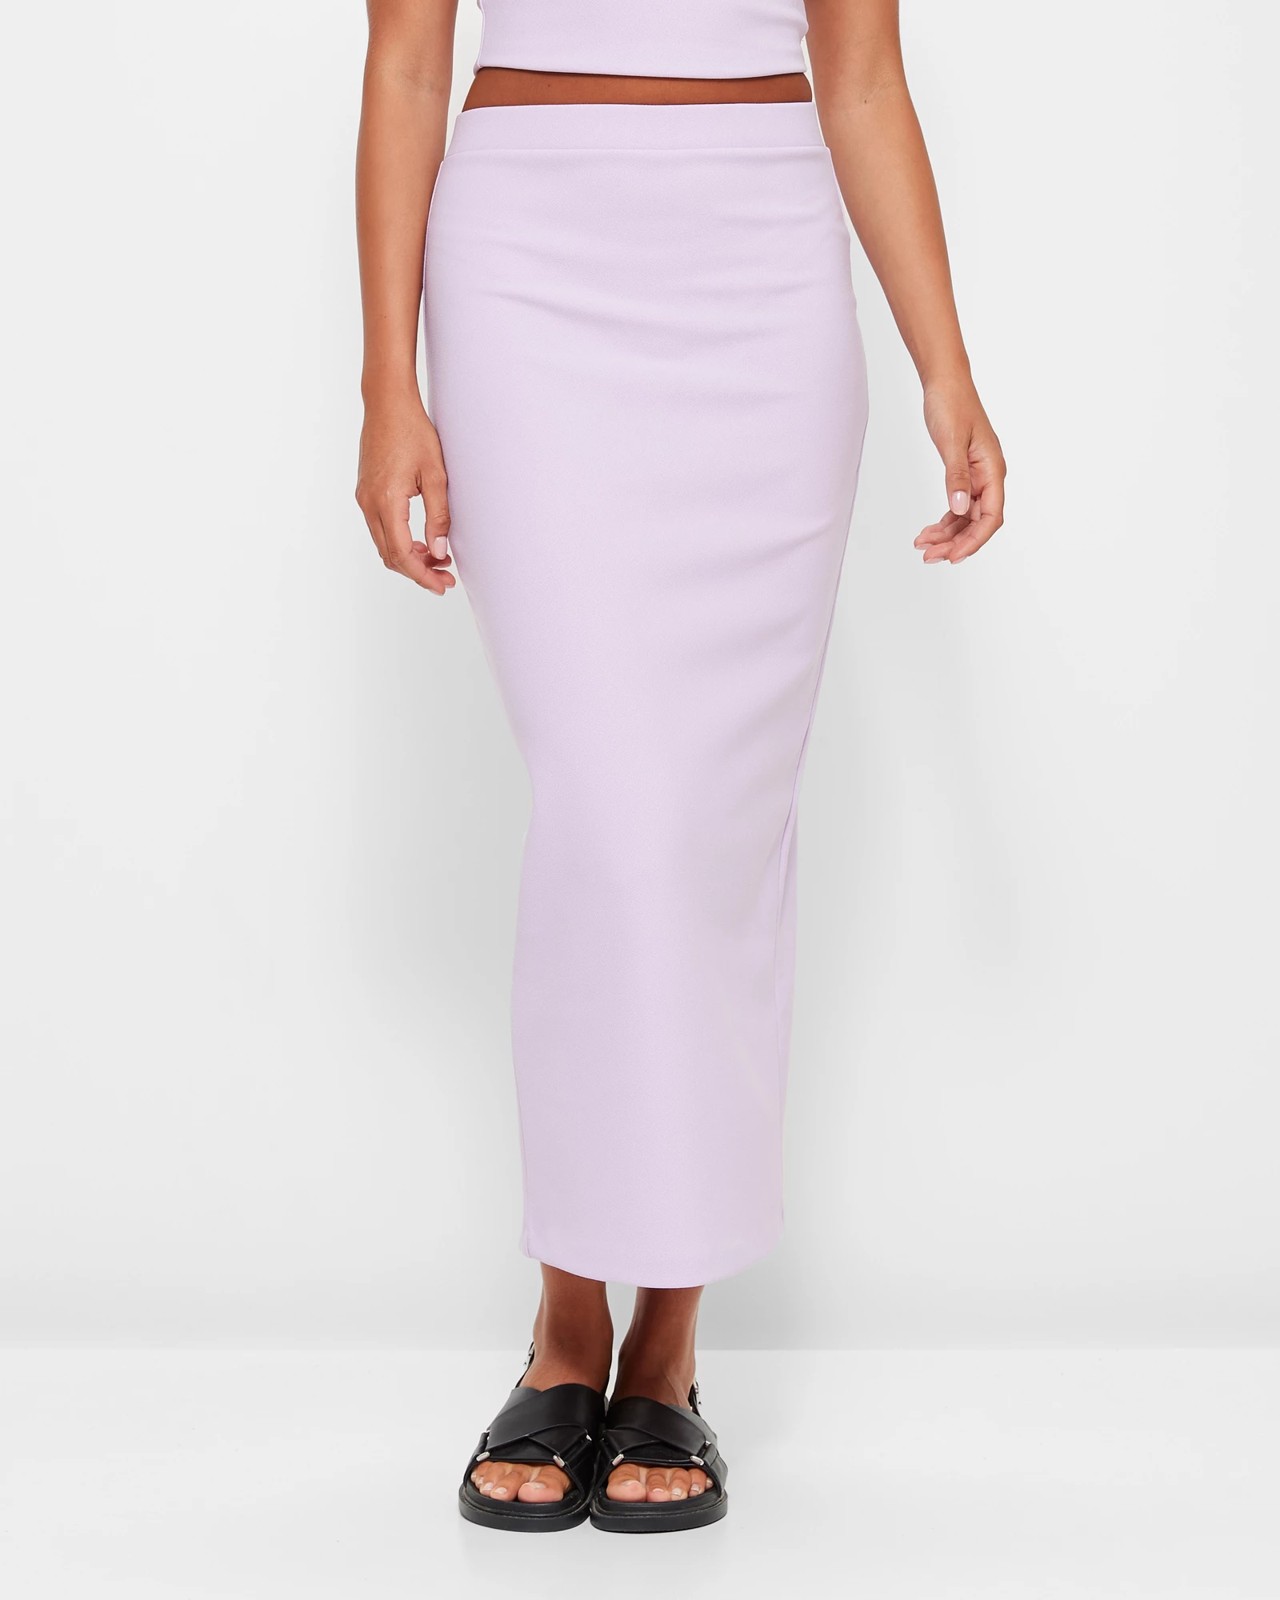 Crepe Maxi Skirt - Lily Loves - Pastel Lilac